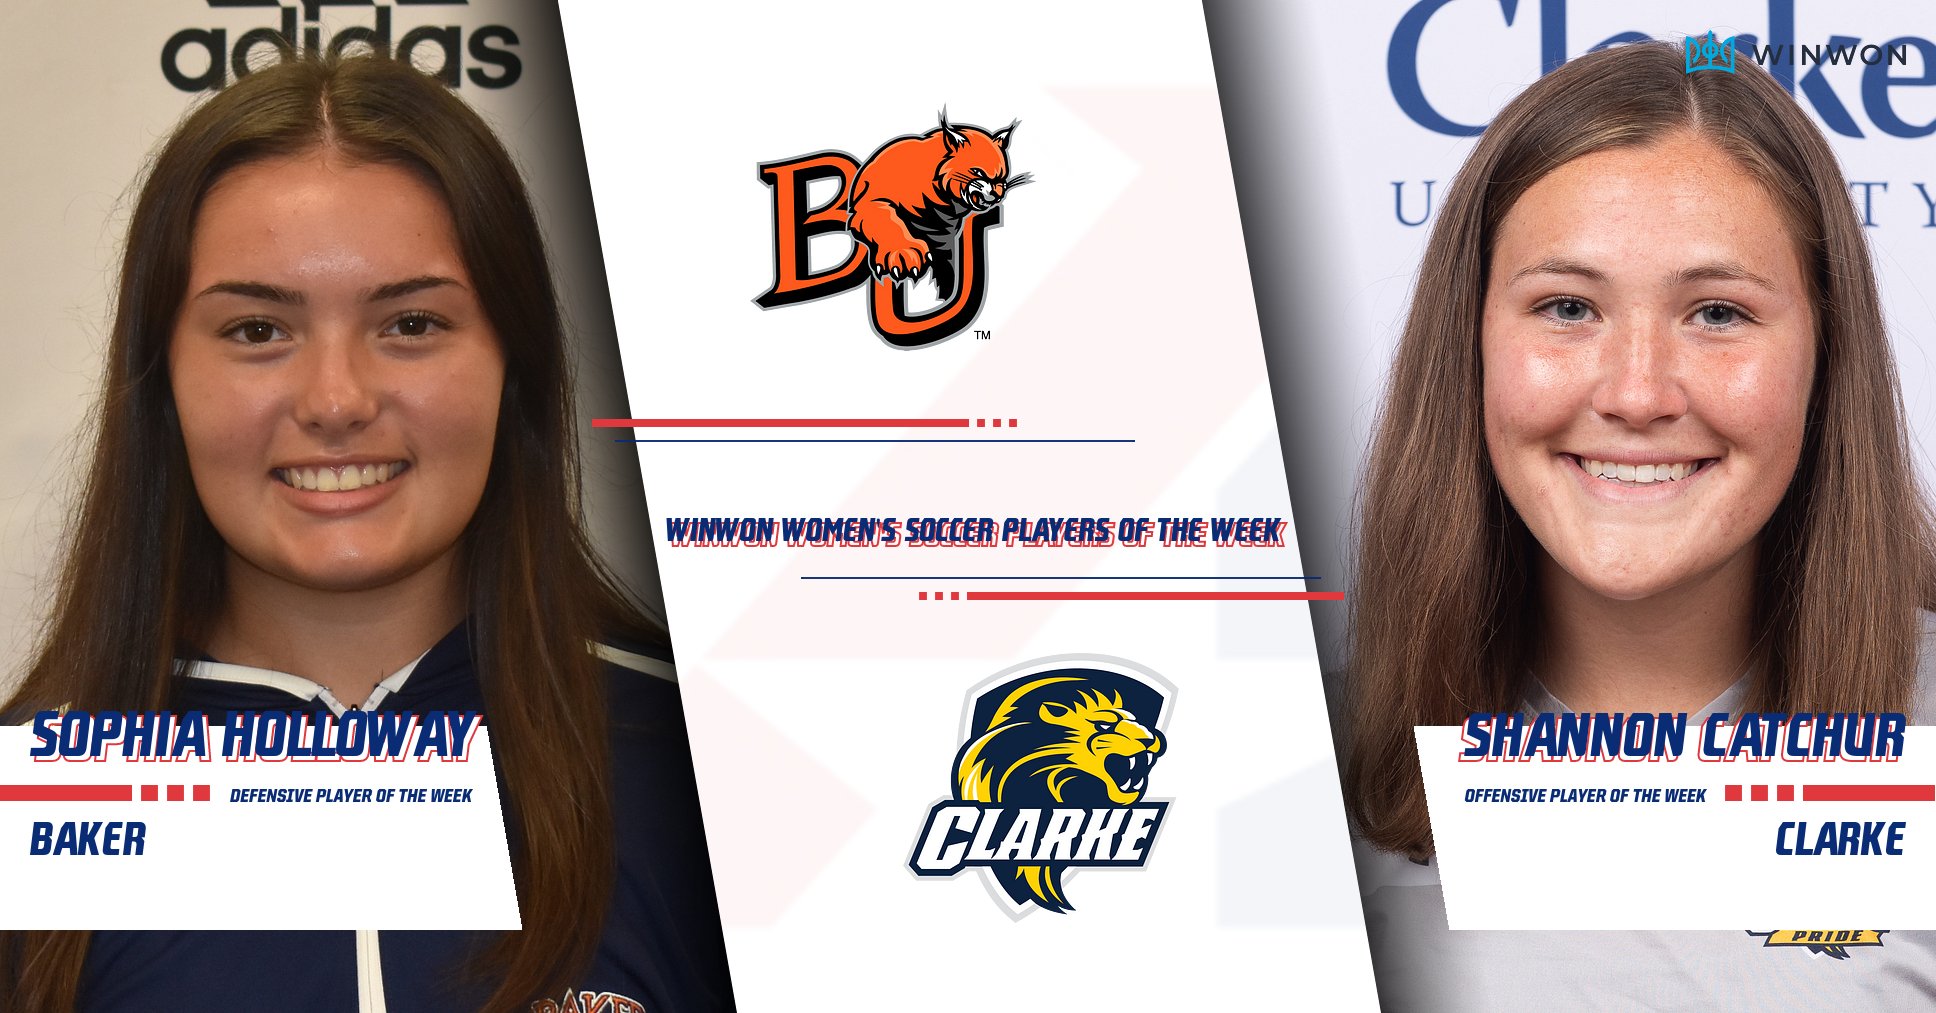 WinWon Women's Soccer Players of the Week - August 28